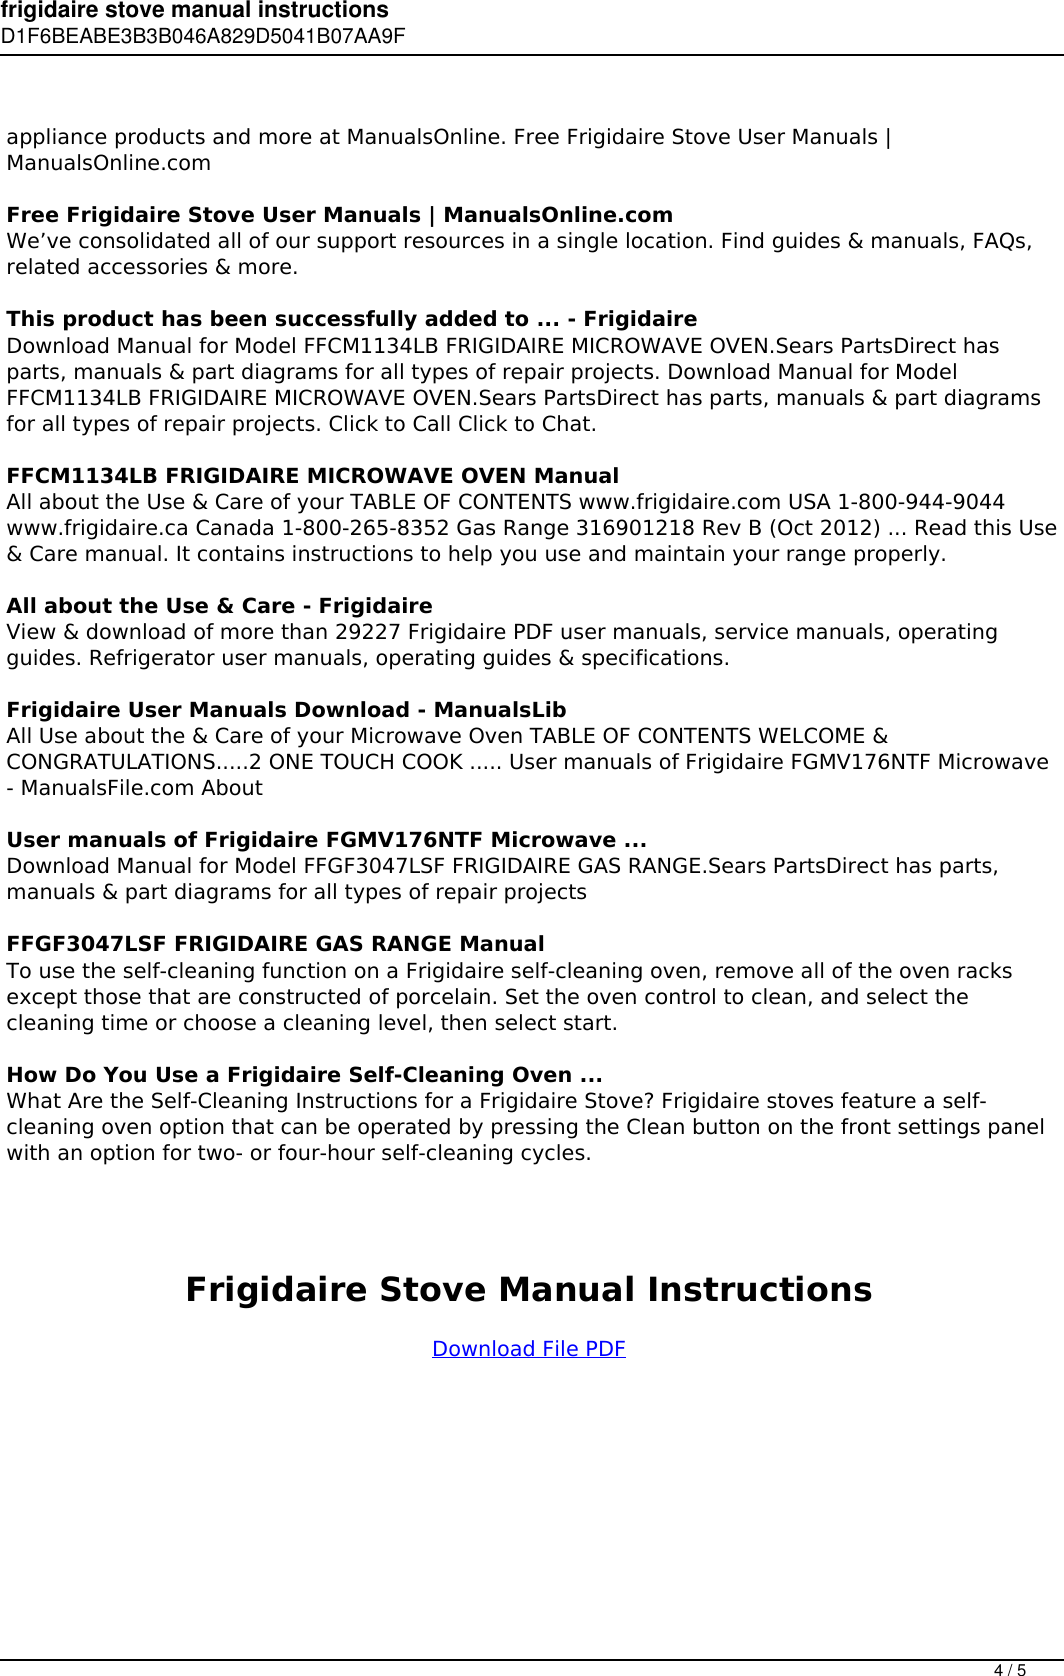 Page 4 of 5 - Frigidaire Stove Manual Instructions